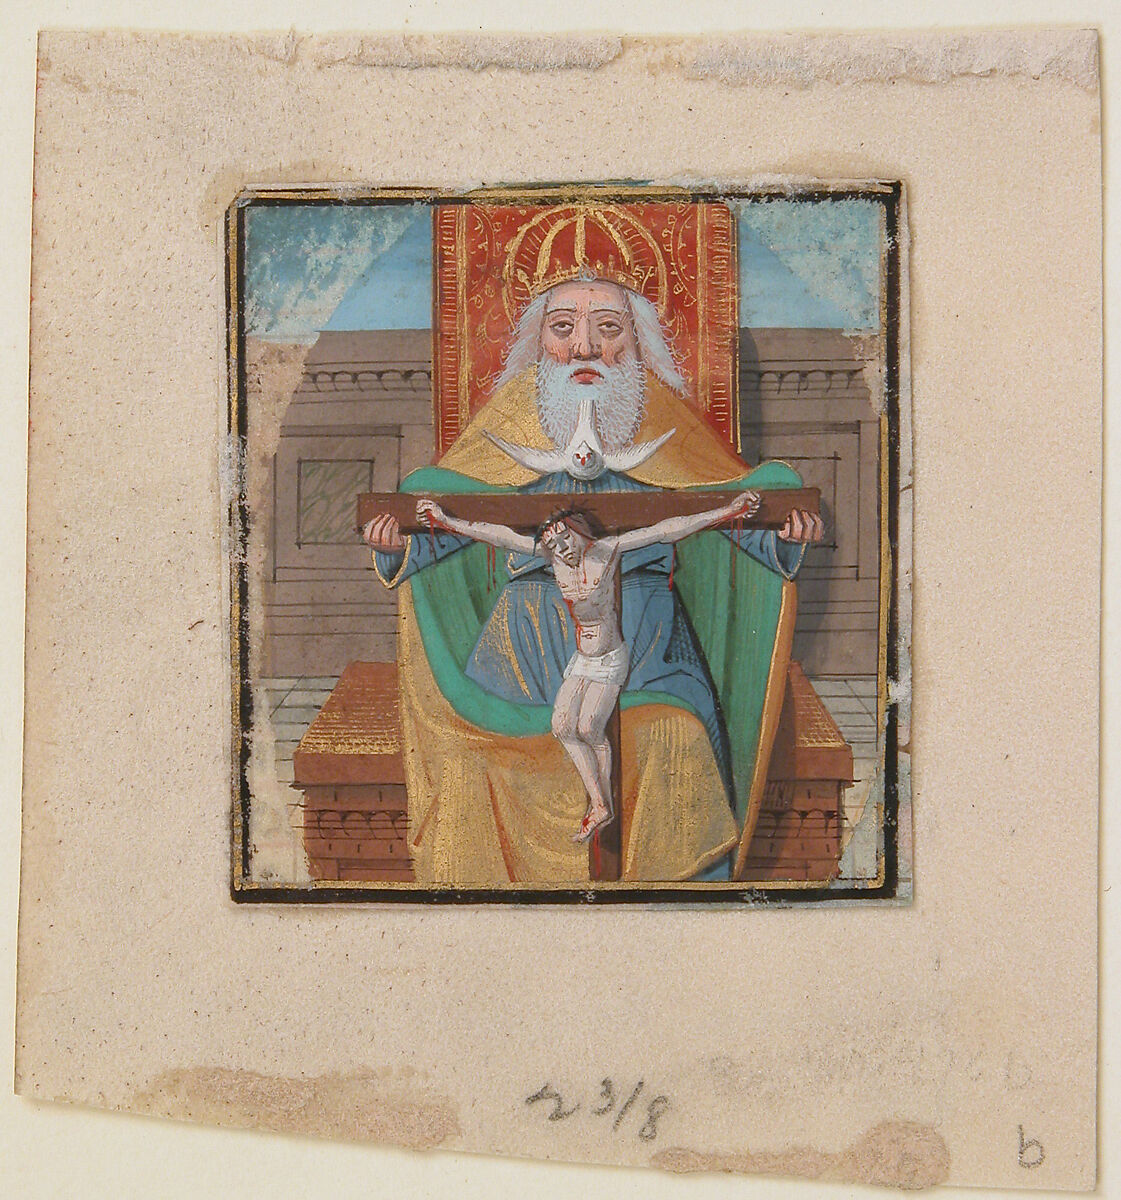 Manuscript Illumination with the Trinity, from a Book of Hours, Tempera, ink, and shell gold on parchment, North French 